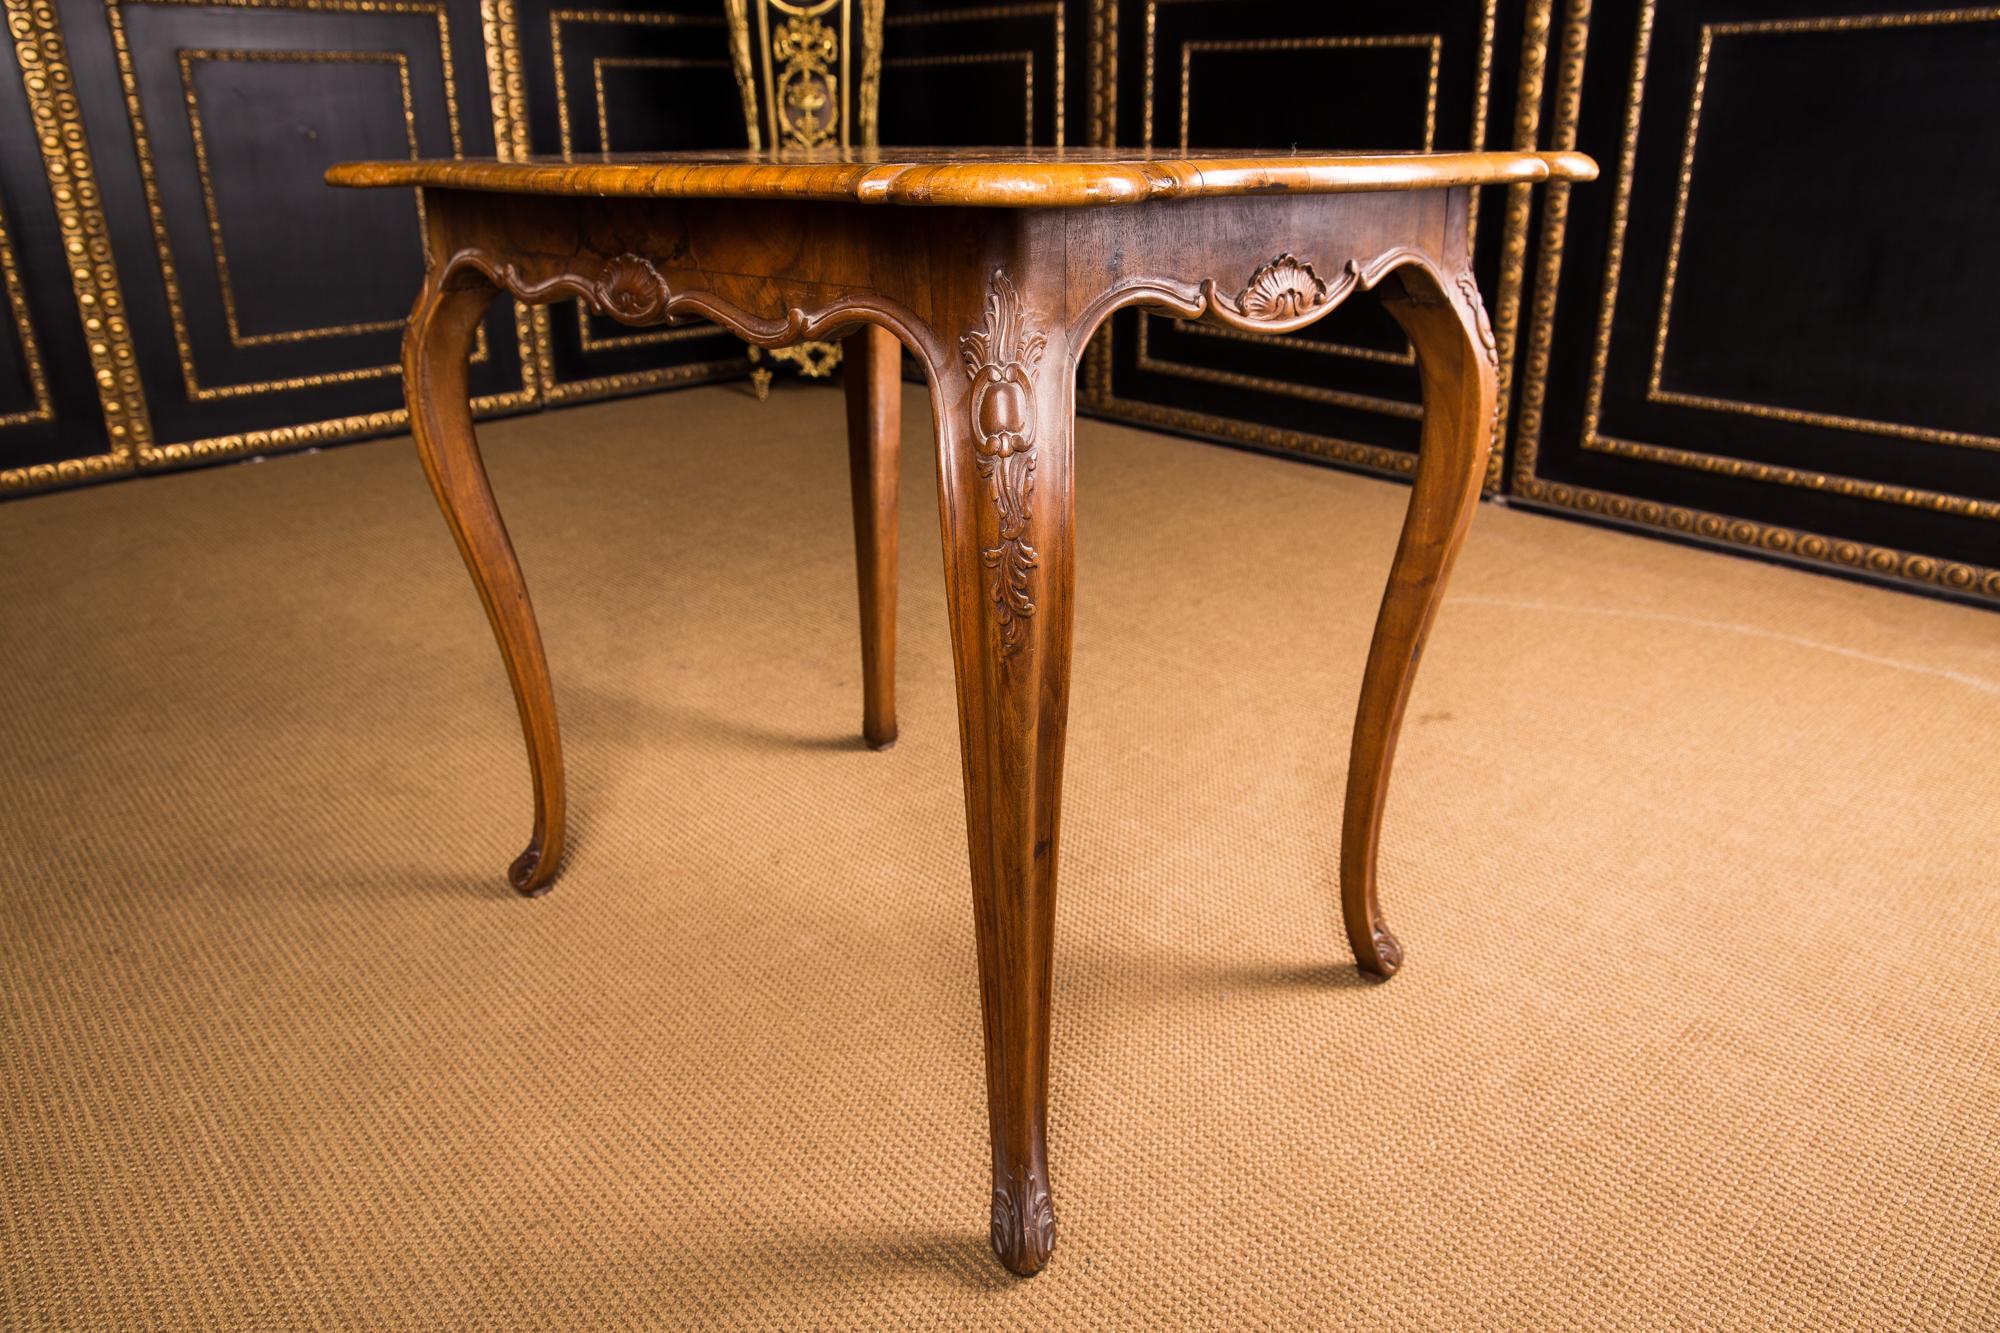 18th Century, Original Antique Baroque Table with Inlaid from Solid Walnut 5